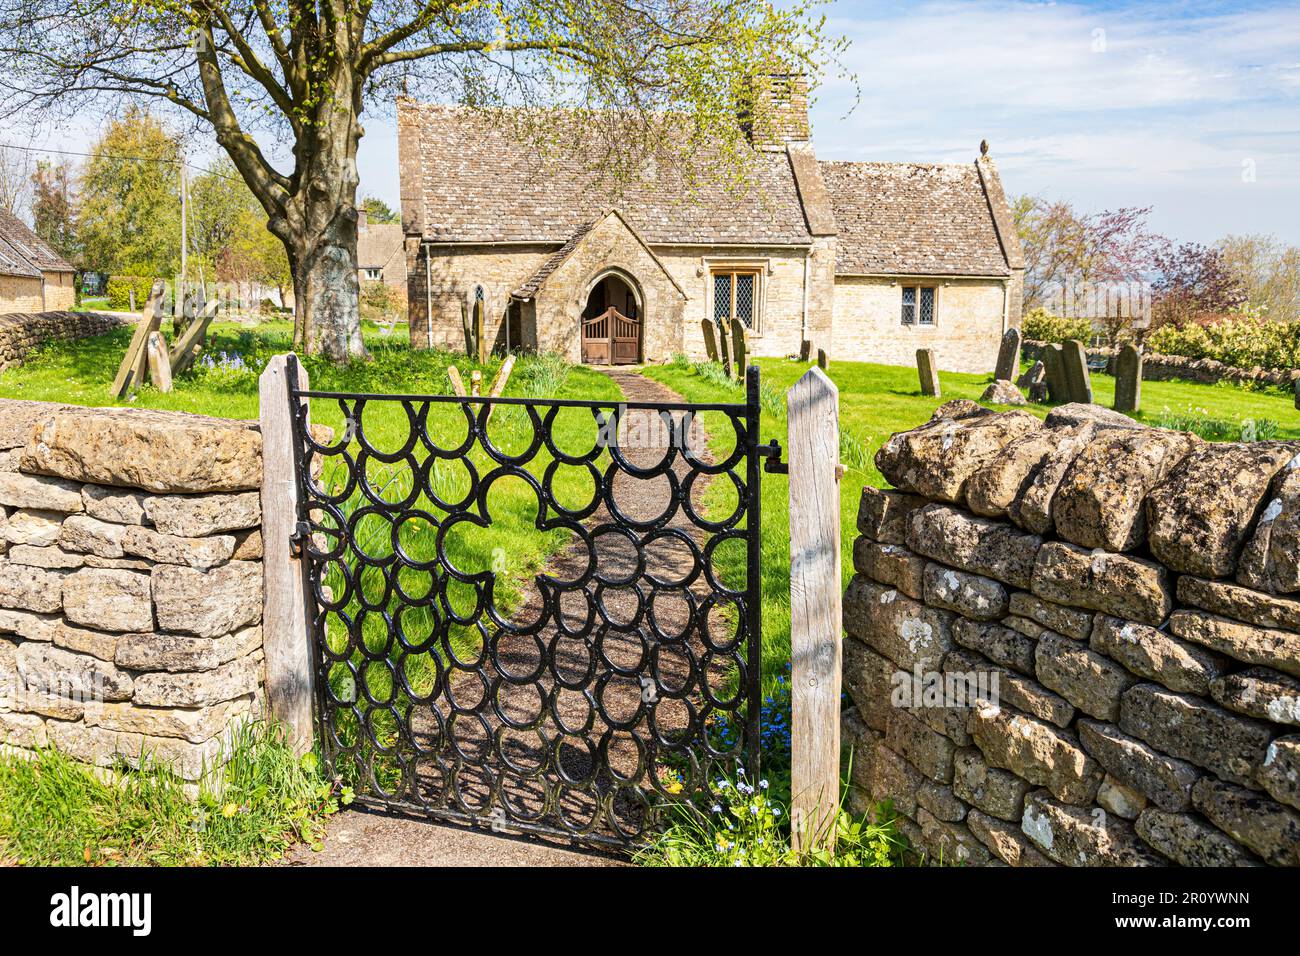 Church of St. James in the Cotswold village of Clapton-on-on-the-Hill, Gloucestershire UK. Wrought iron horseshoe gate was made by Raymond Phillips. Stock Photo